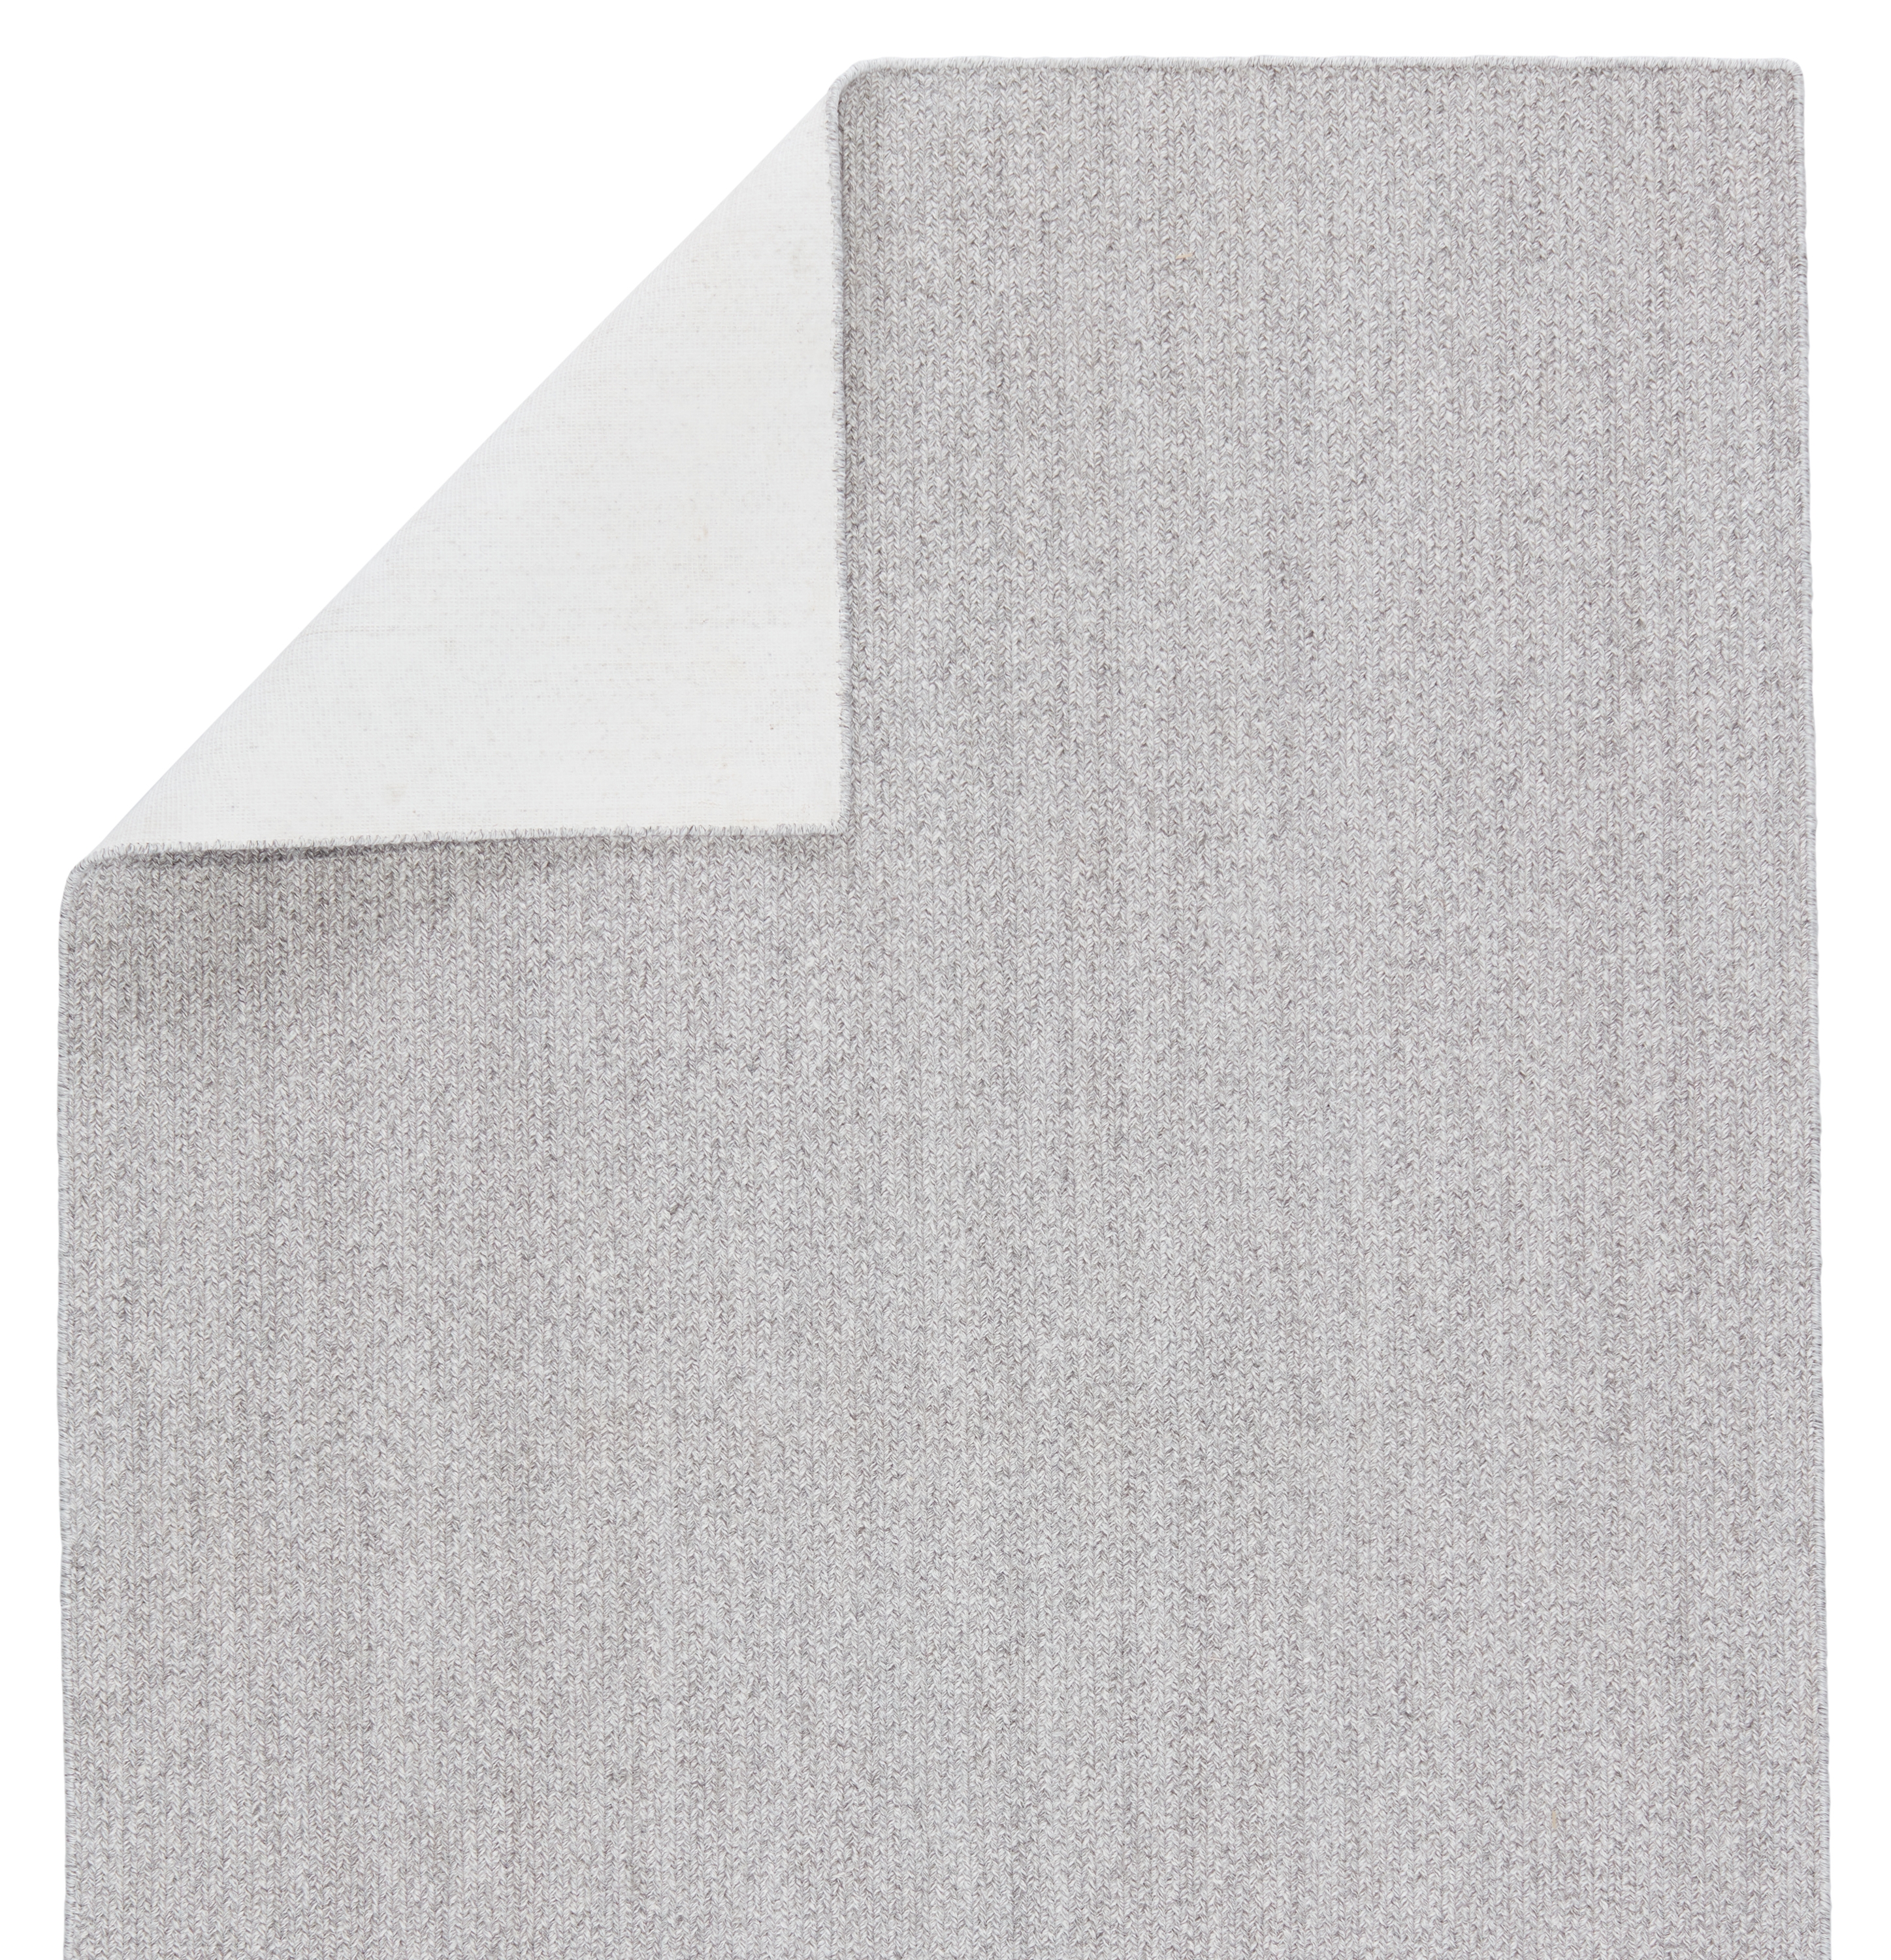 Maracay Indoor/ Outdoor Solid Light Gray/ White Area Rug (4'X6') - Image 2